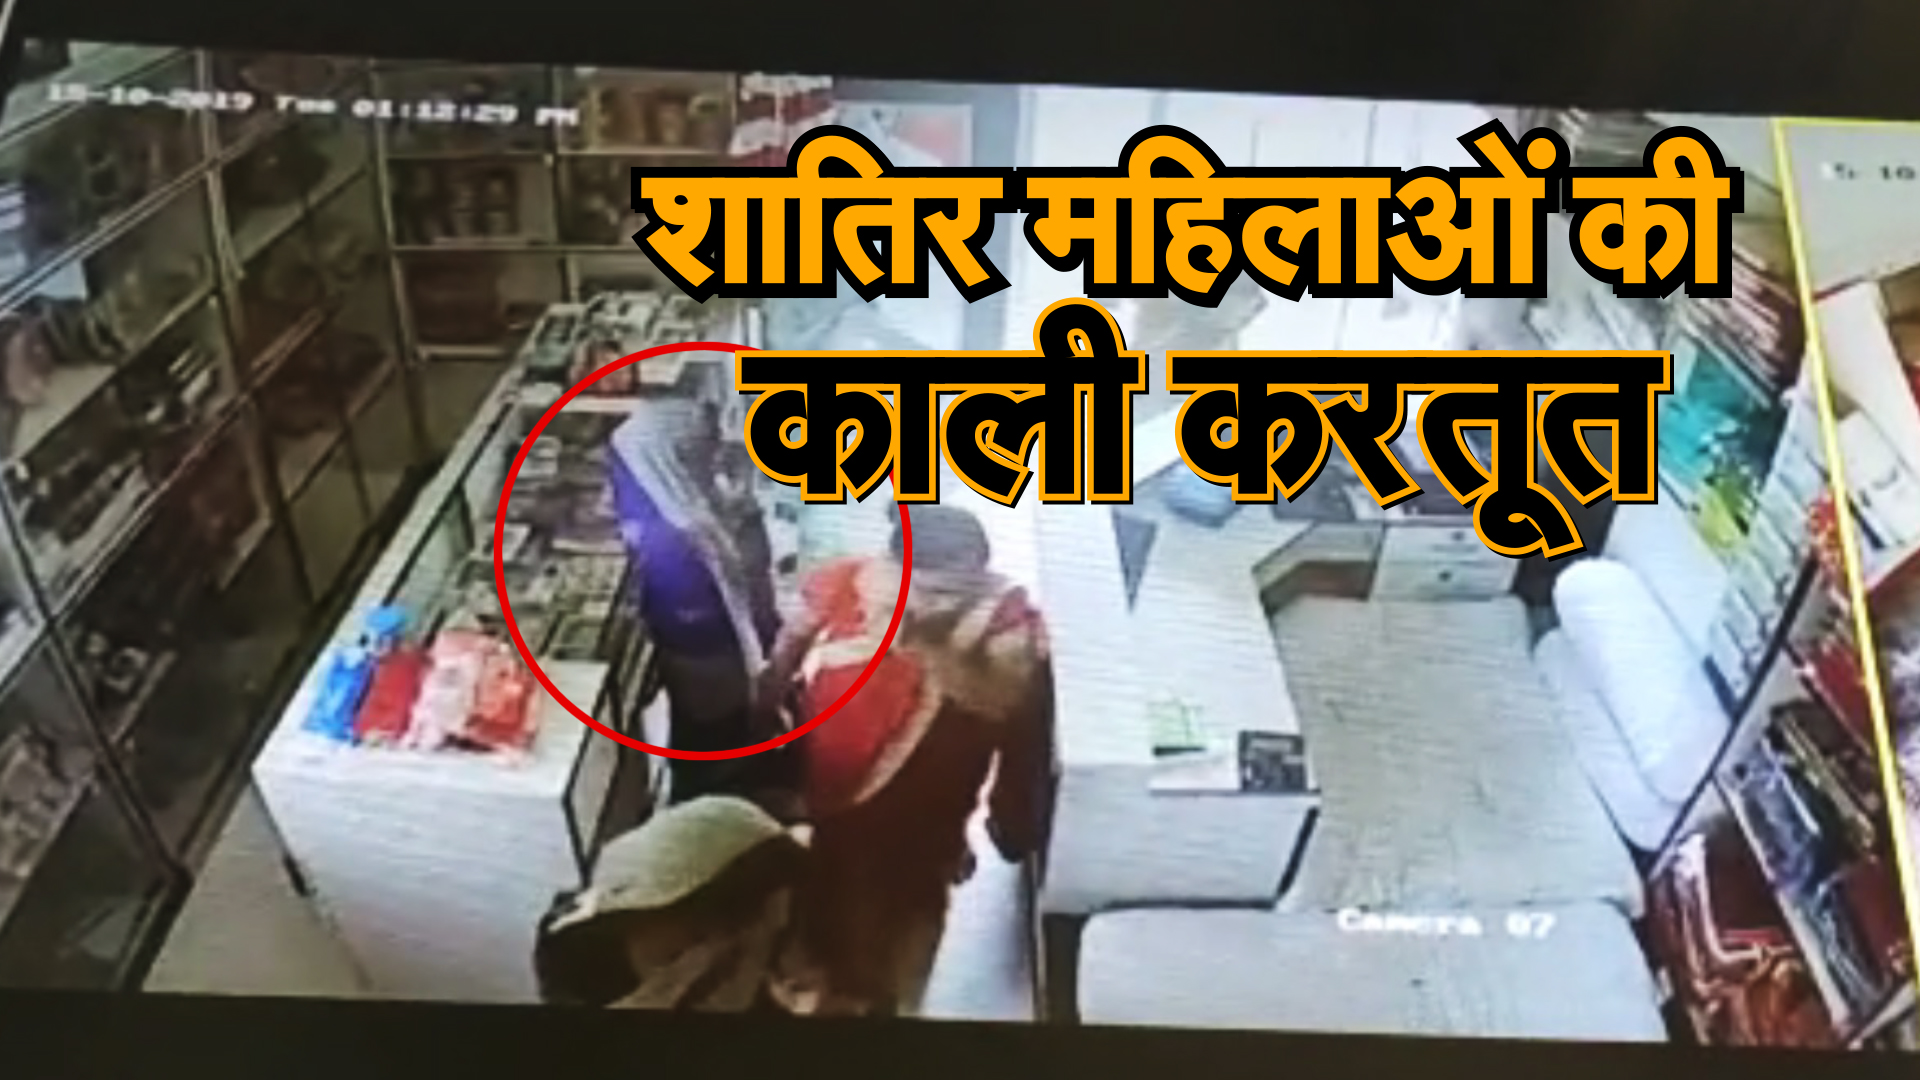 Theft in sikar